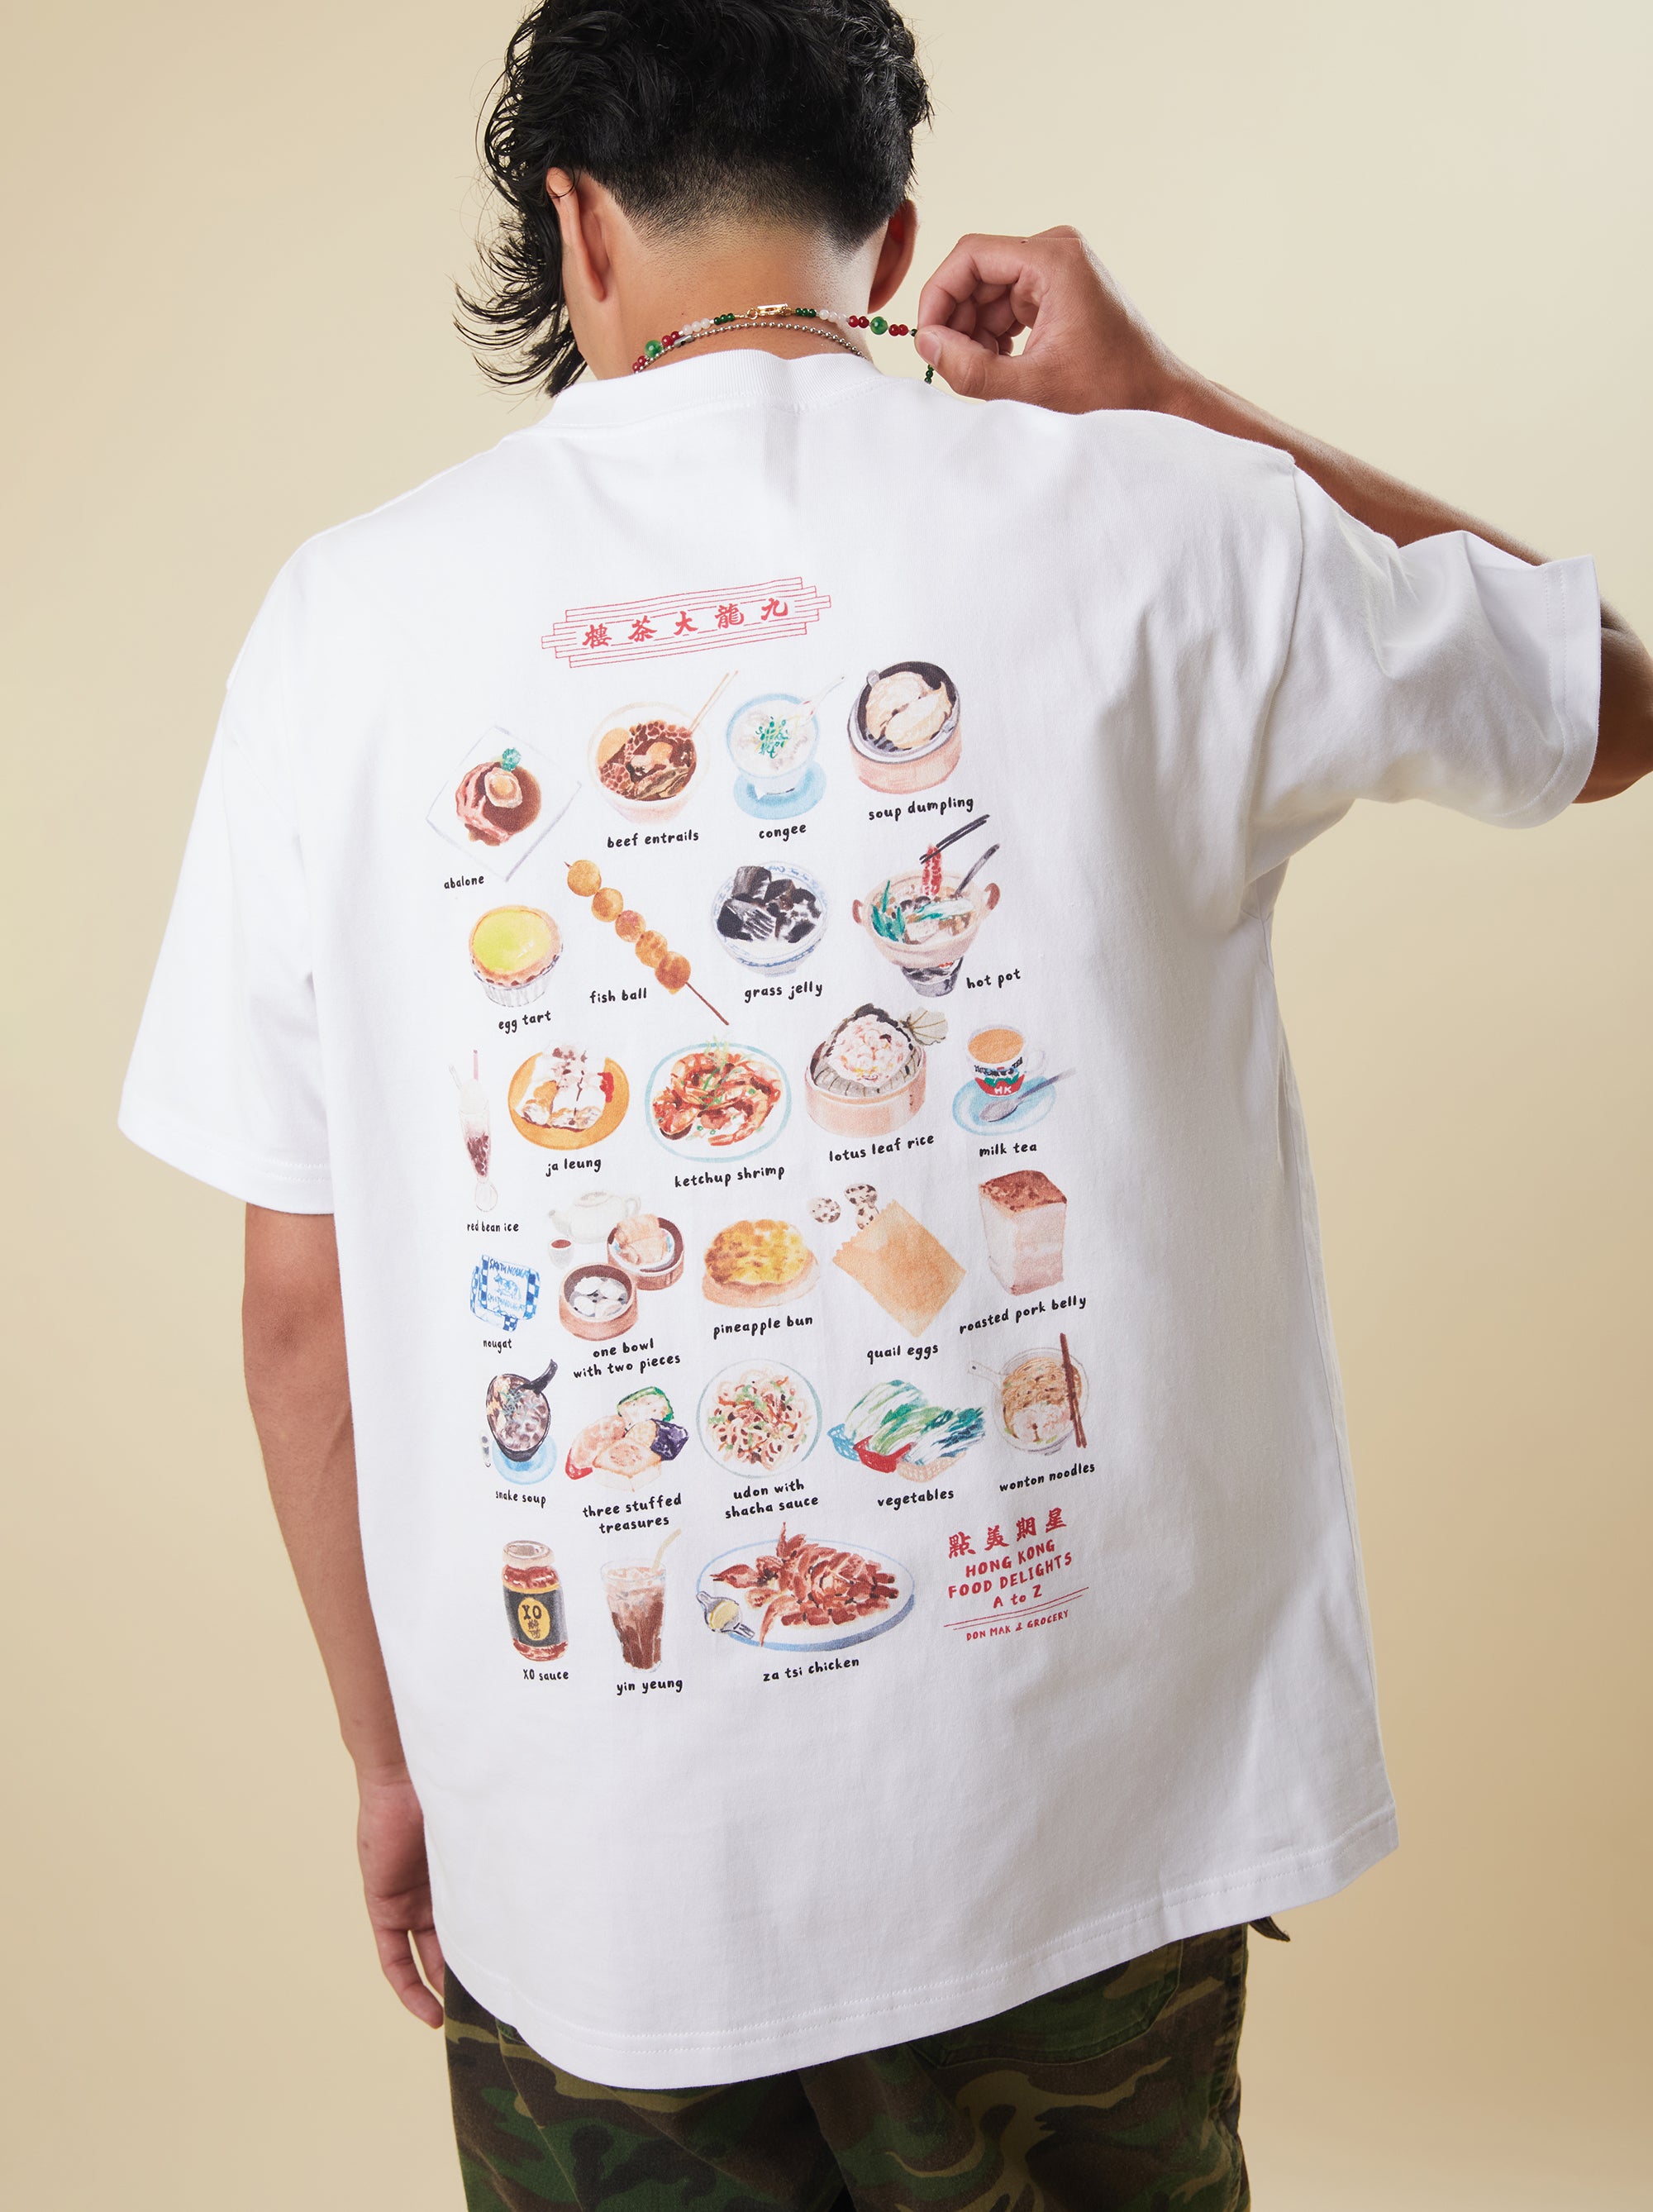 Grodesign - Hong Kong Food Delights White Tee by Don Mak